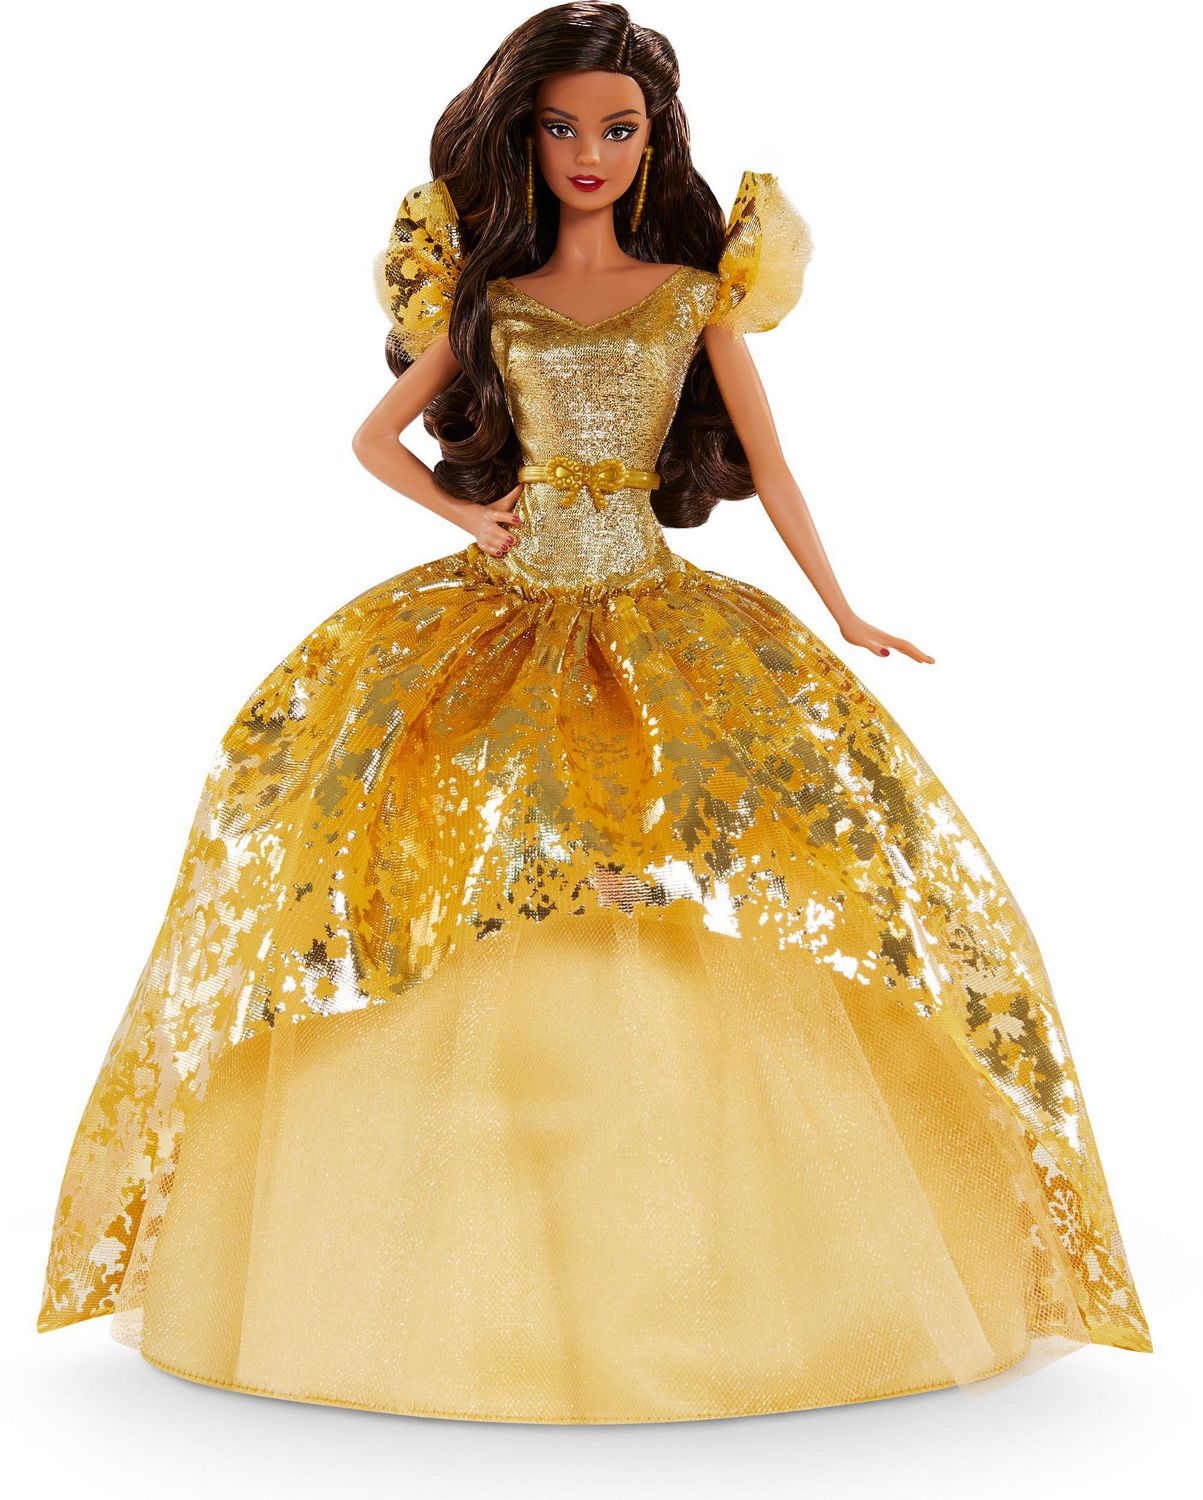 African American, Gold Dress, Black Curly Hair Mattel Holiday Barbie Doll 2020 for sale online 